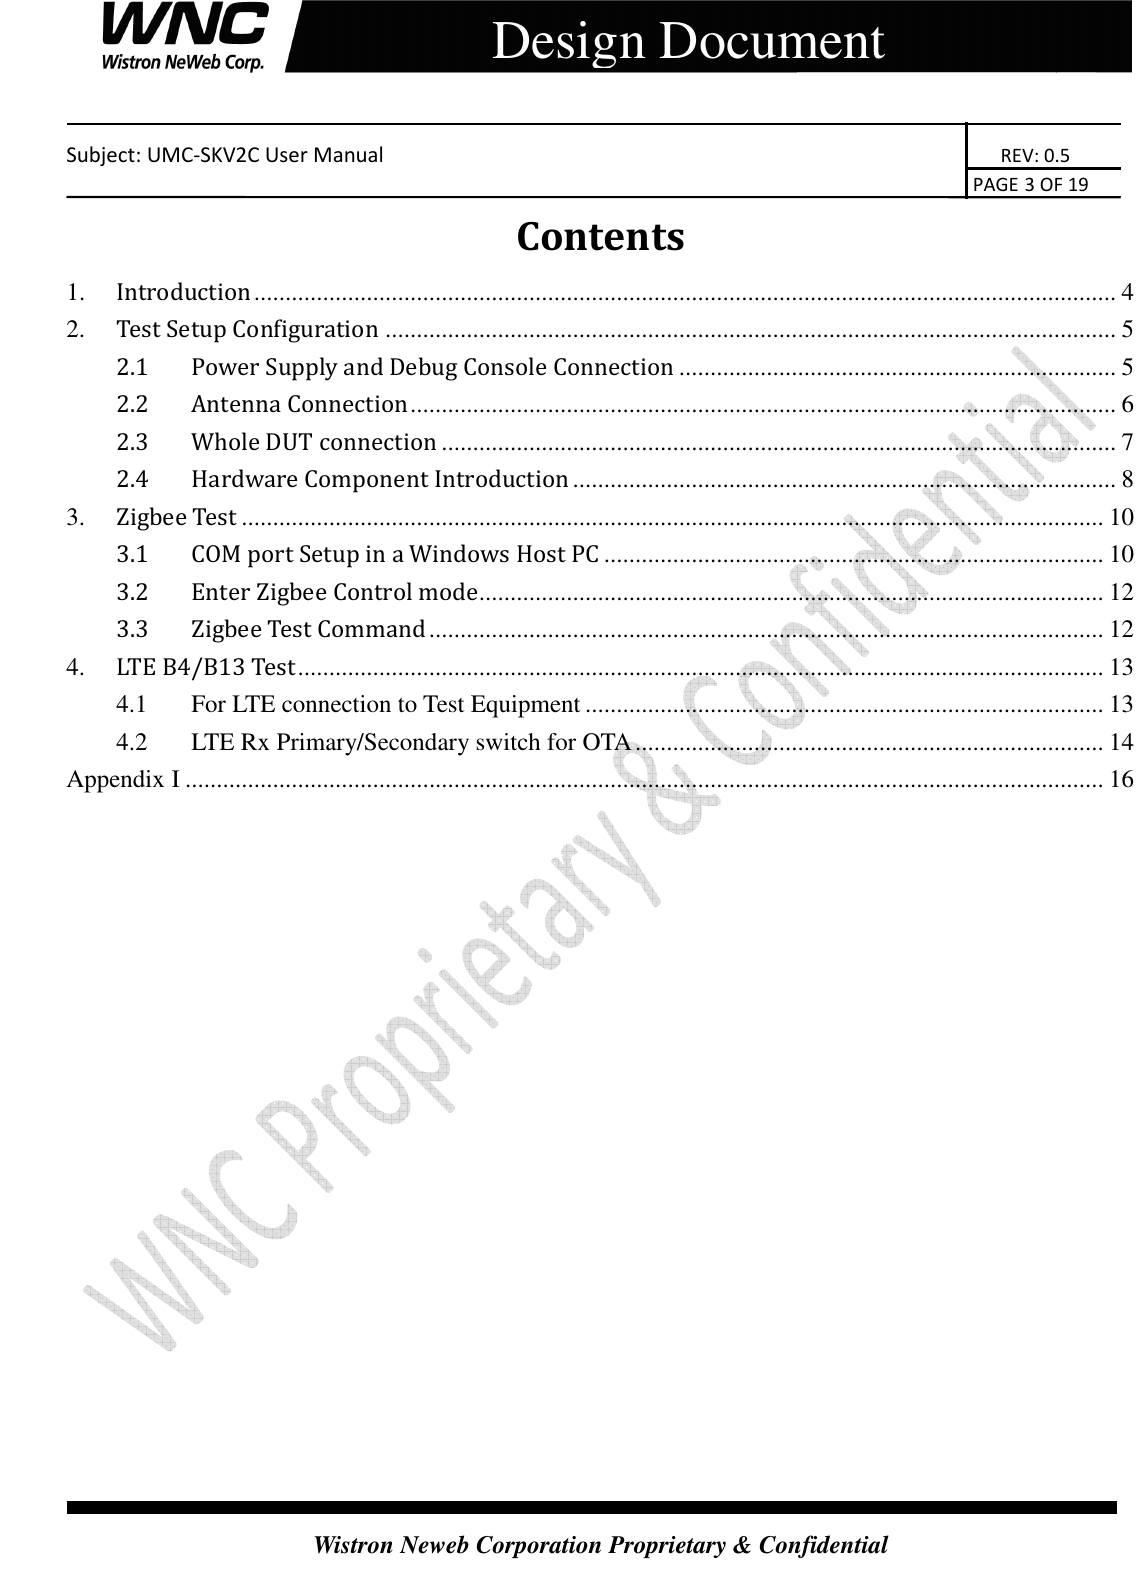    Subject: UMC-SKV2C User Manual                                                                       REV: 0.5                                                                                                                                                                               PAGE 3 OF 19  Wistron Neweb Corporation Proprietary &amp; Confidential     Design Document Contents 1. Introduction .......................................................................................................................................... 4 2. Test Setup Configuration ..................................................................................................................... 5 2.1 Power Supply and Debug Console Connection ...................................................................... 5 2.2 Antenna Connection ................................................................................................................. 6 2.3 Whole DUT connection ............................................................................................................ 7 2.4 Hardware Component Introduction ....................................................................................... 8 3. Zigbee Test .......................................................................................................................................... 10 3.1 COM port Setup in a Windows Host PC ................................................................................ 10 3.2 Enter Zigbee Control mode .................................................................................................... 12 3.3 Zigbee Test Command ............................................................................................................ 12 4. LTE B4/B13 Test ................................................................................................................................. 13 4.1 For LTE connection to Test Equipment ................................................................................... 13 4.2 LTE Rx Primary/Secondary switch for OTA ........................................................................... 14 Appendix I ................................................................................................................................................... 16     